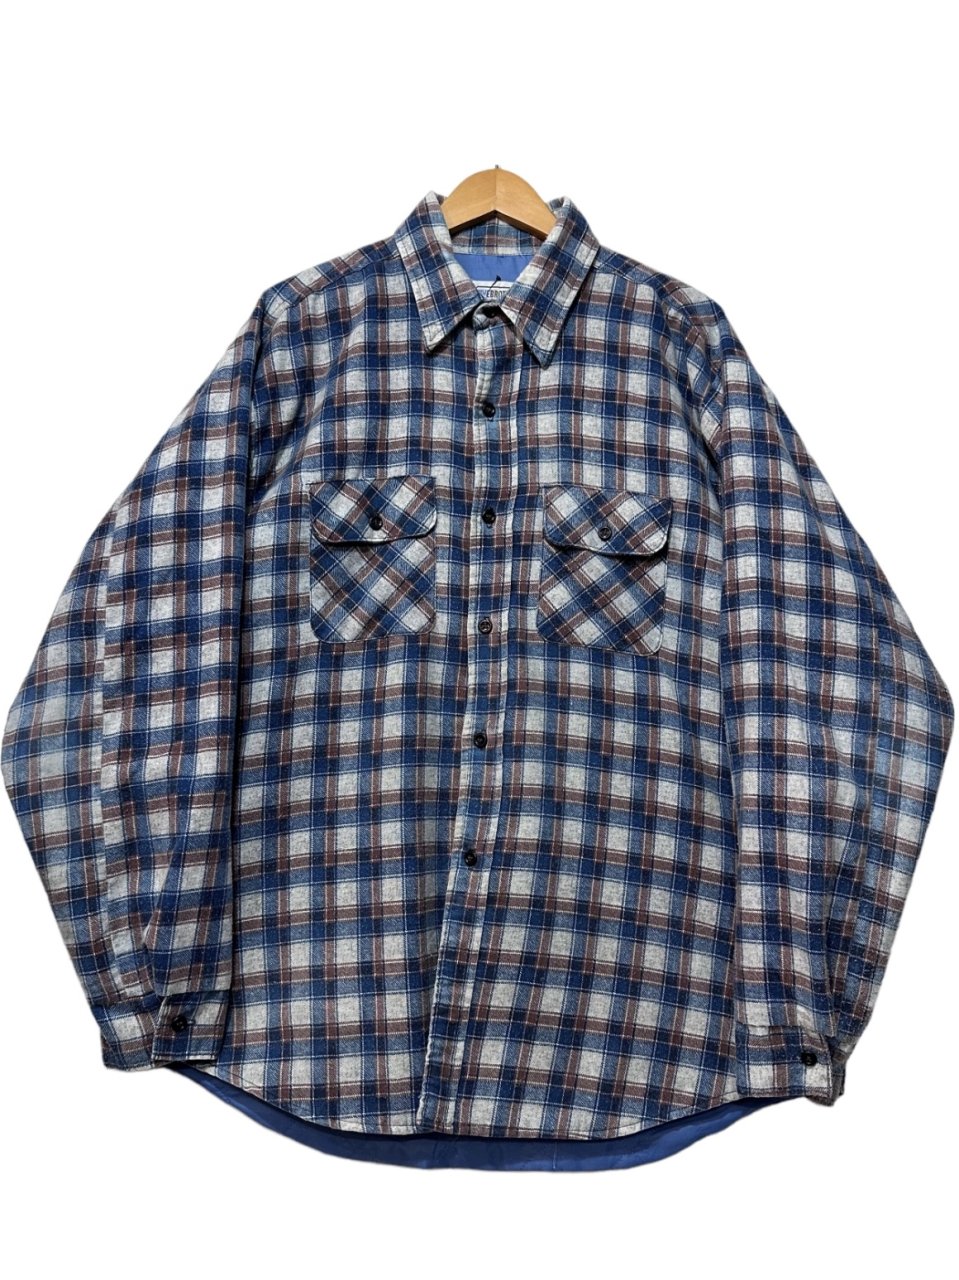 USA製 80s FIVE BROTHER Quilting Lined Flannel L/S Shirt 青茶 XL ファイブブラザー 長袖  シャツ ネルシャツ チェック柄 キルティング 古着 - NEWJOKE ONLINE STORE